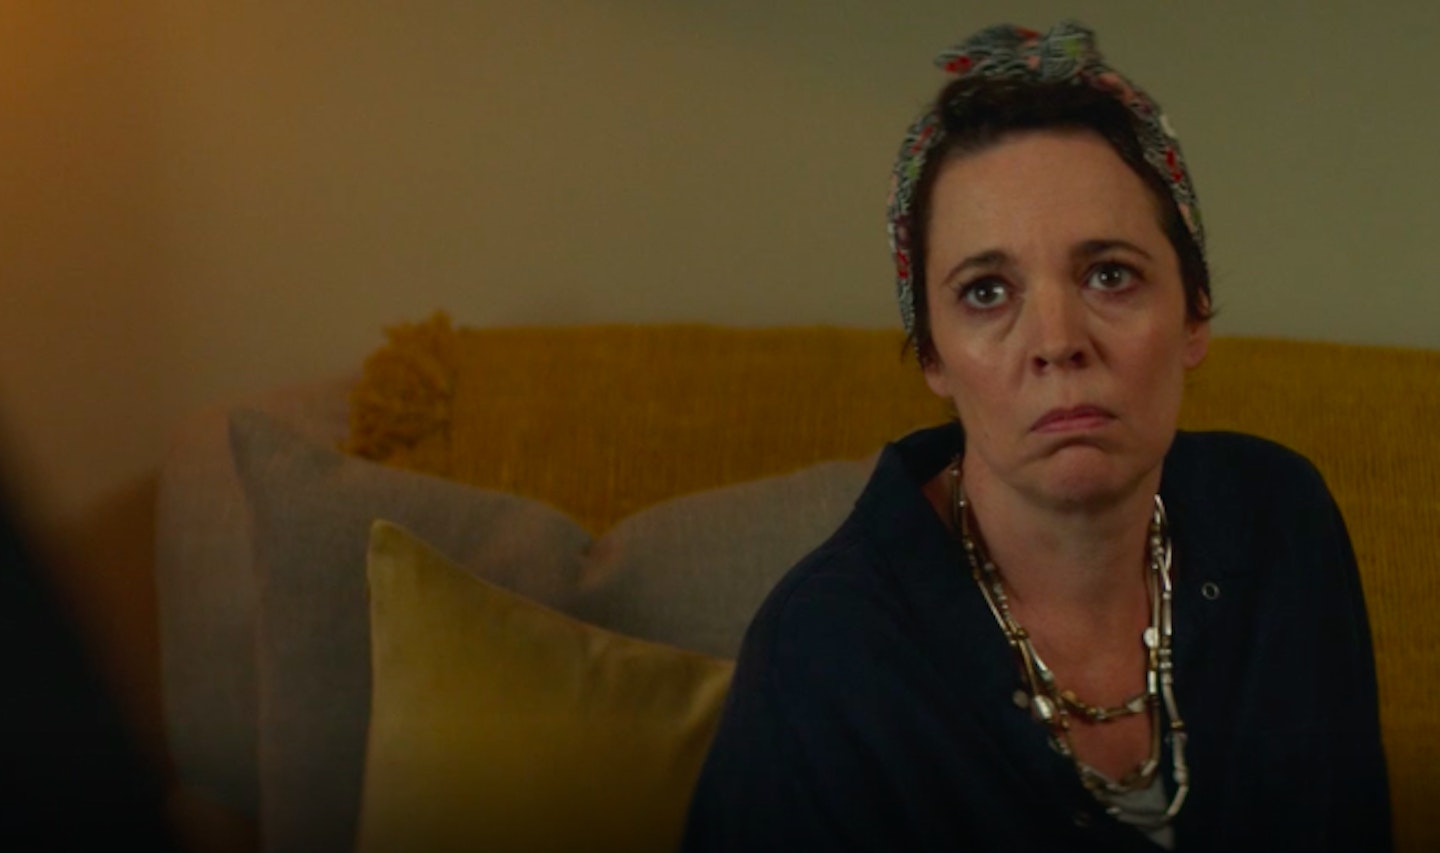 Olivia Colman eloquently shrieking that The Hot Priest a cunt (as soon as he leaves, obviously) when he says he can't officiate their weddding.